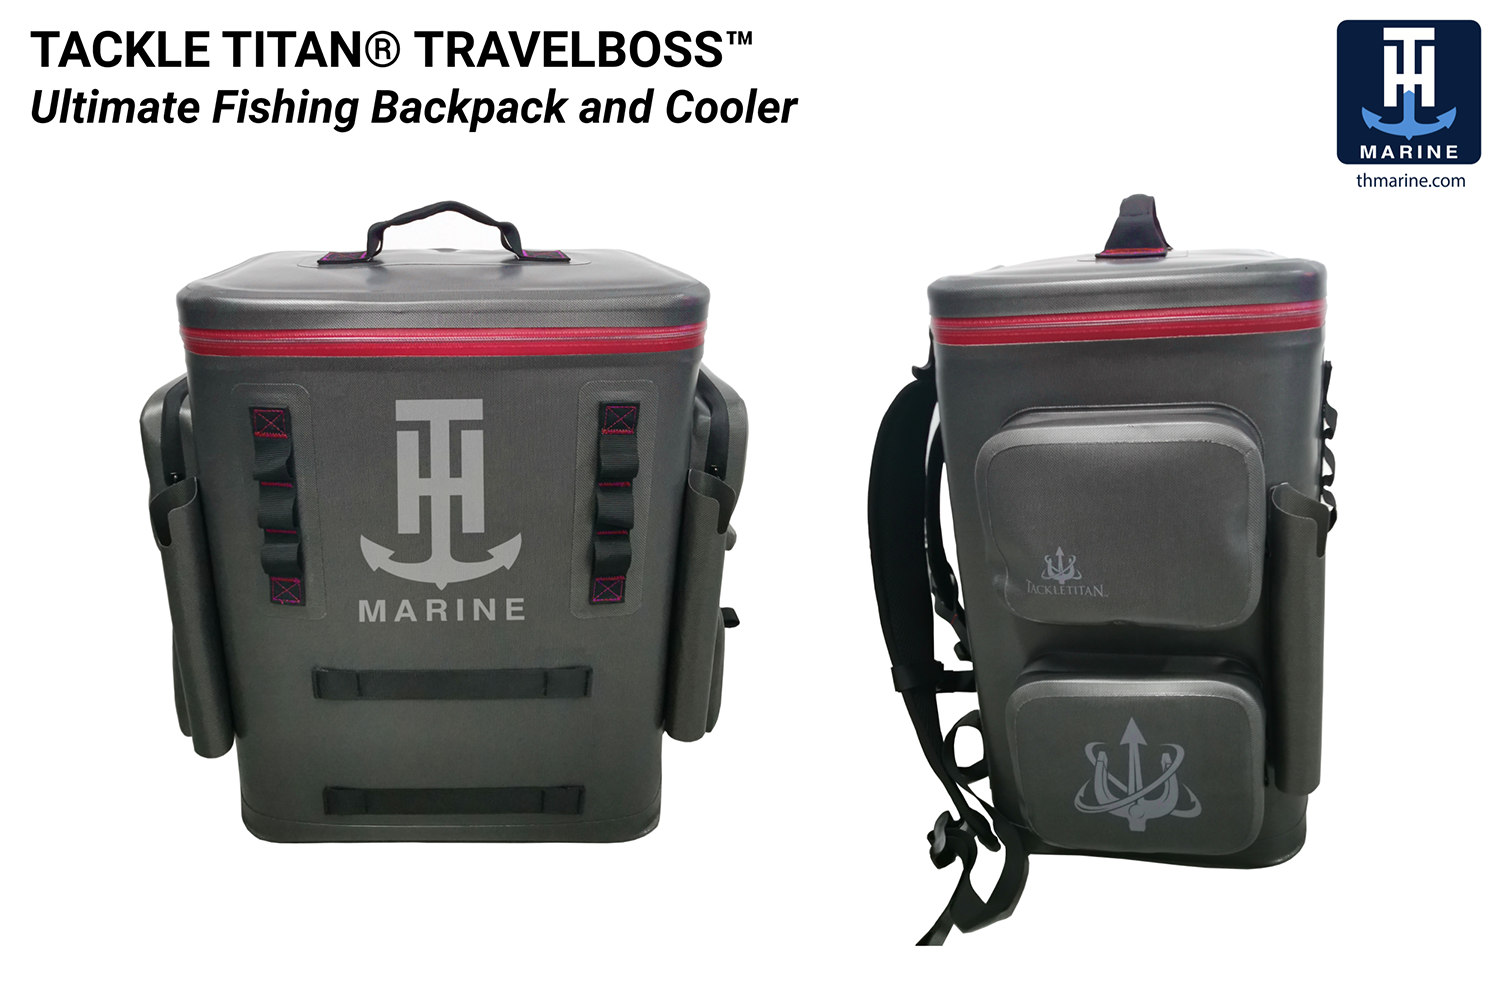 <p><b>Tackle Titan TravelBoss Ultimate Fishing Backpack and Cooler</b></p>
<p>How does the TravelBossvUltimate Fishing Backpack and Cooler stack up? Tackle tray space? Ample. Slotted rod holders? Two. Cooler space for snacks and beverages? Included. Pockets for tools and miscellaneous accessories? Built-in. Accessory loops for attaching more gear? Of course. A comfortable fit? You bet. With everything built into this backpack and cooler, along with a significantly more economical price when compared with similar backpacks, thereâs no doubt that the TravelBoss is ideal for trips across the water, on the trail, around a tailgate, and much more. </p>
<p><a href=